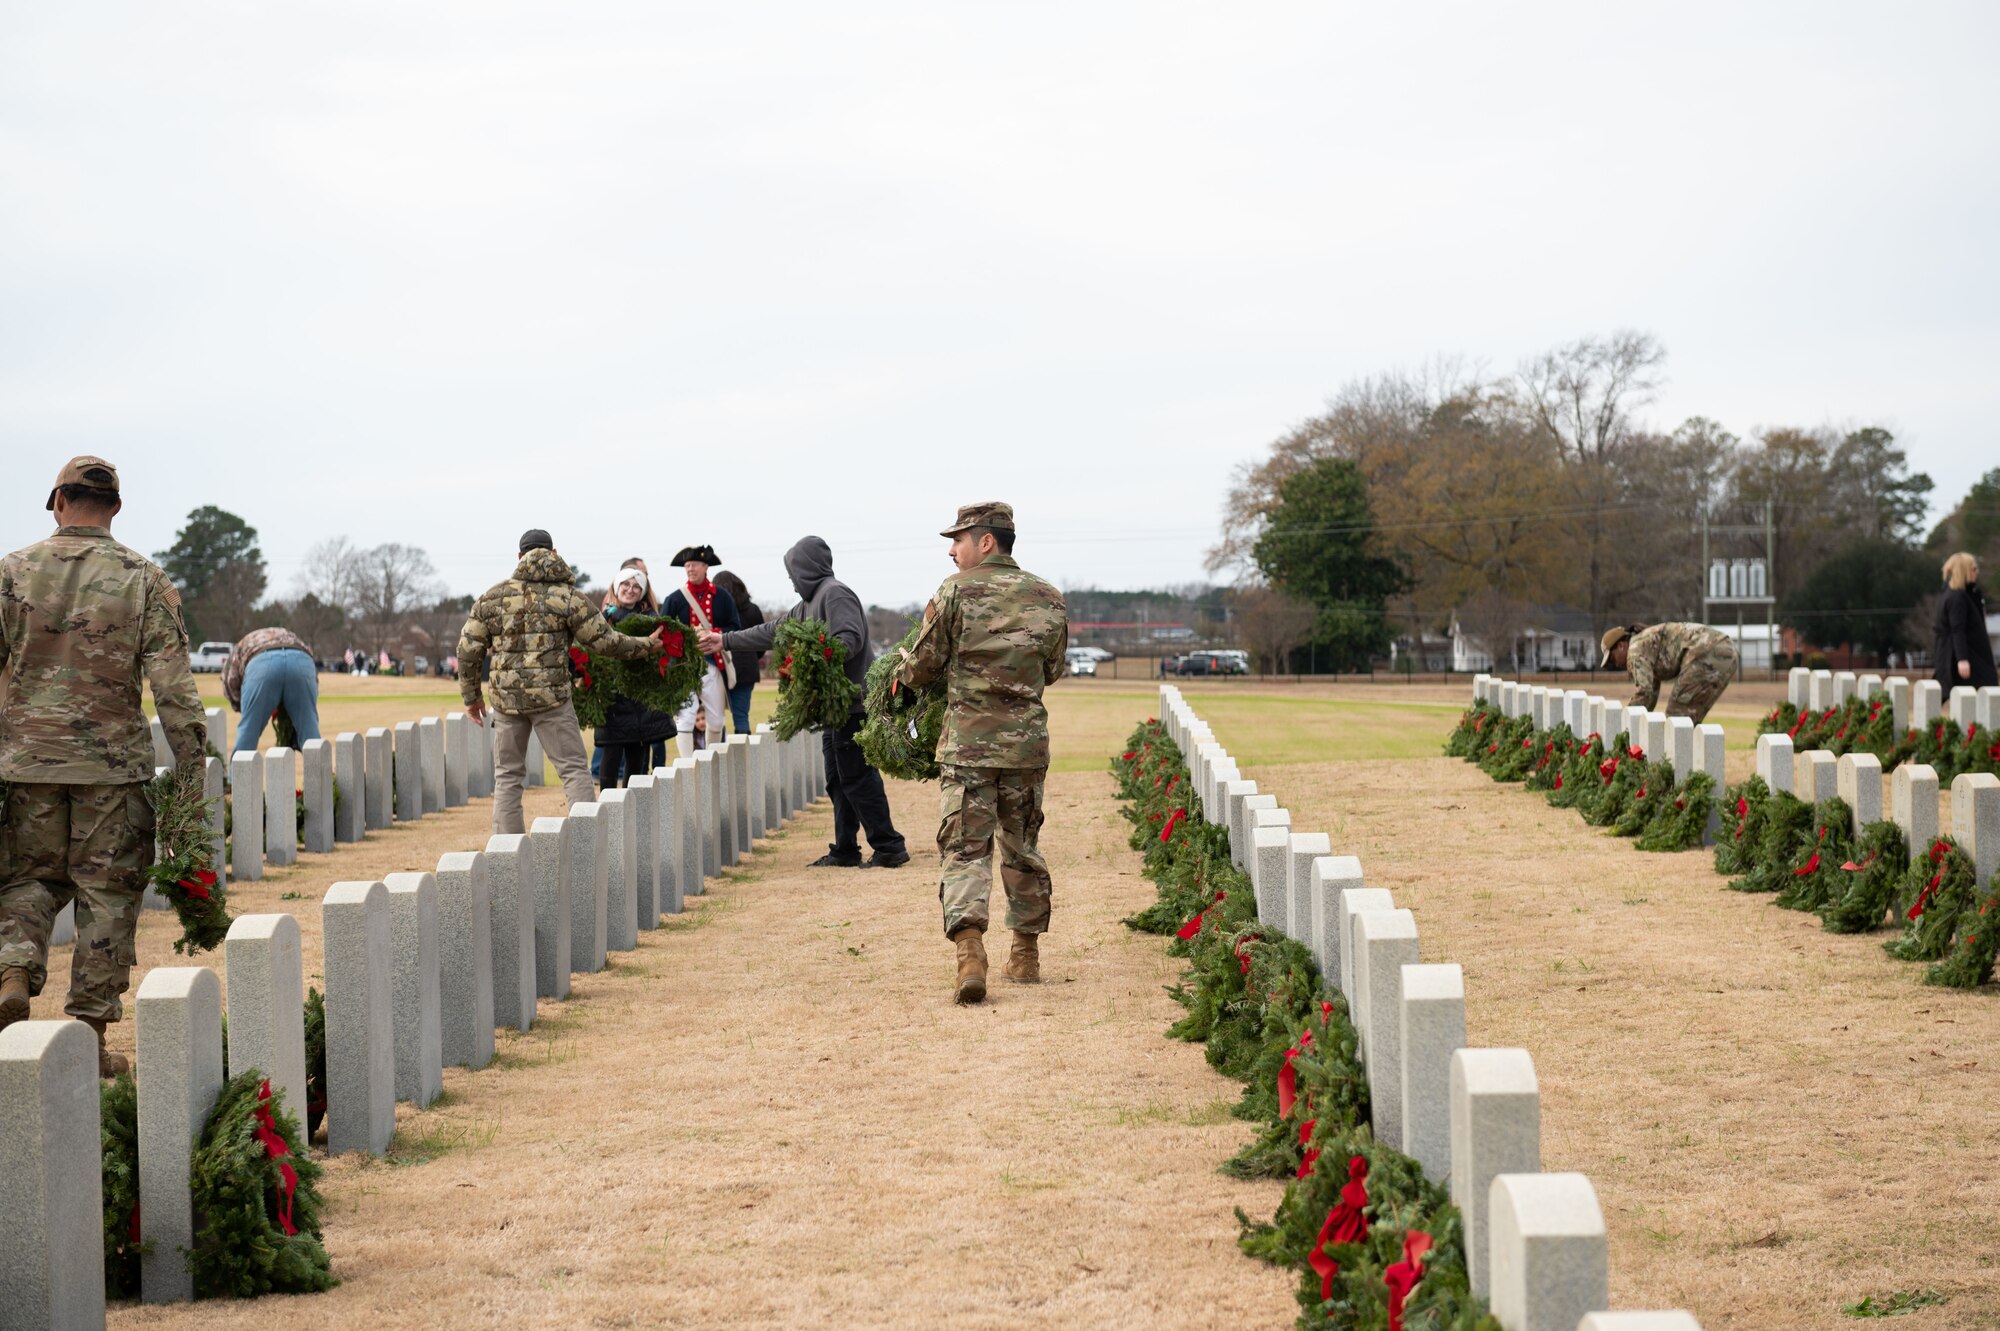 Airmen assigned to Seymour Johnson Air Force Base, North Carolina, and members of the community, lay wreaths during Wreaths Across America at Eastern Carolina Veterans Cemetery, Goldsboro, N.C., Dec. 17, 2022. Wreaths Across America is conducted each December at more than 3,400 locations in all 50 states and throughout the world, with the intent of raising awareness and appreciation for the sacrifices of veterans.  (U.S. Air Force photo by Airman 1st Class Rebecca Sirimarco-Lang)